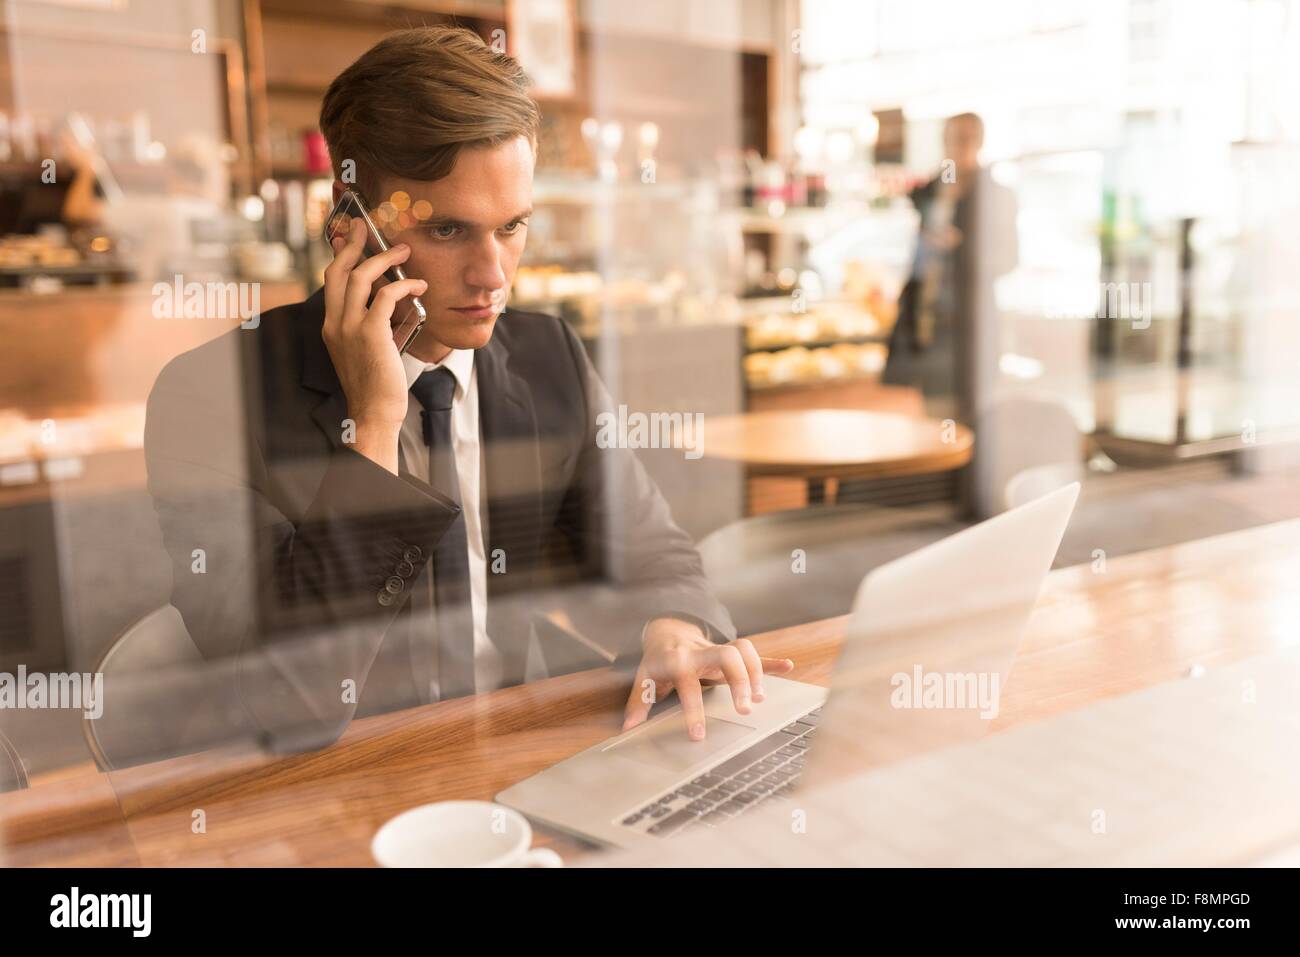 Businessman working on laptop in cafe Banque D'Images